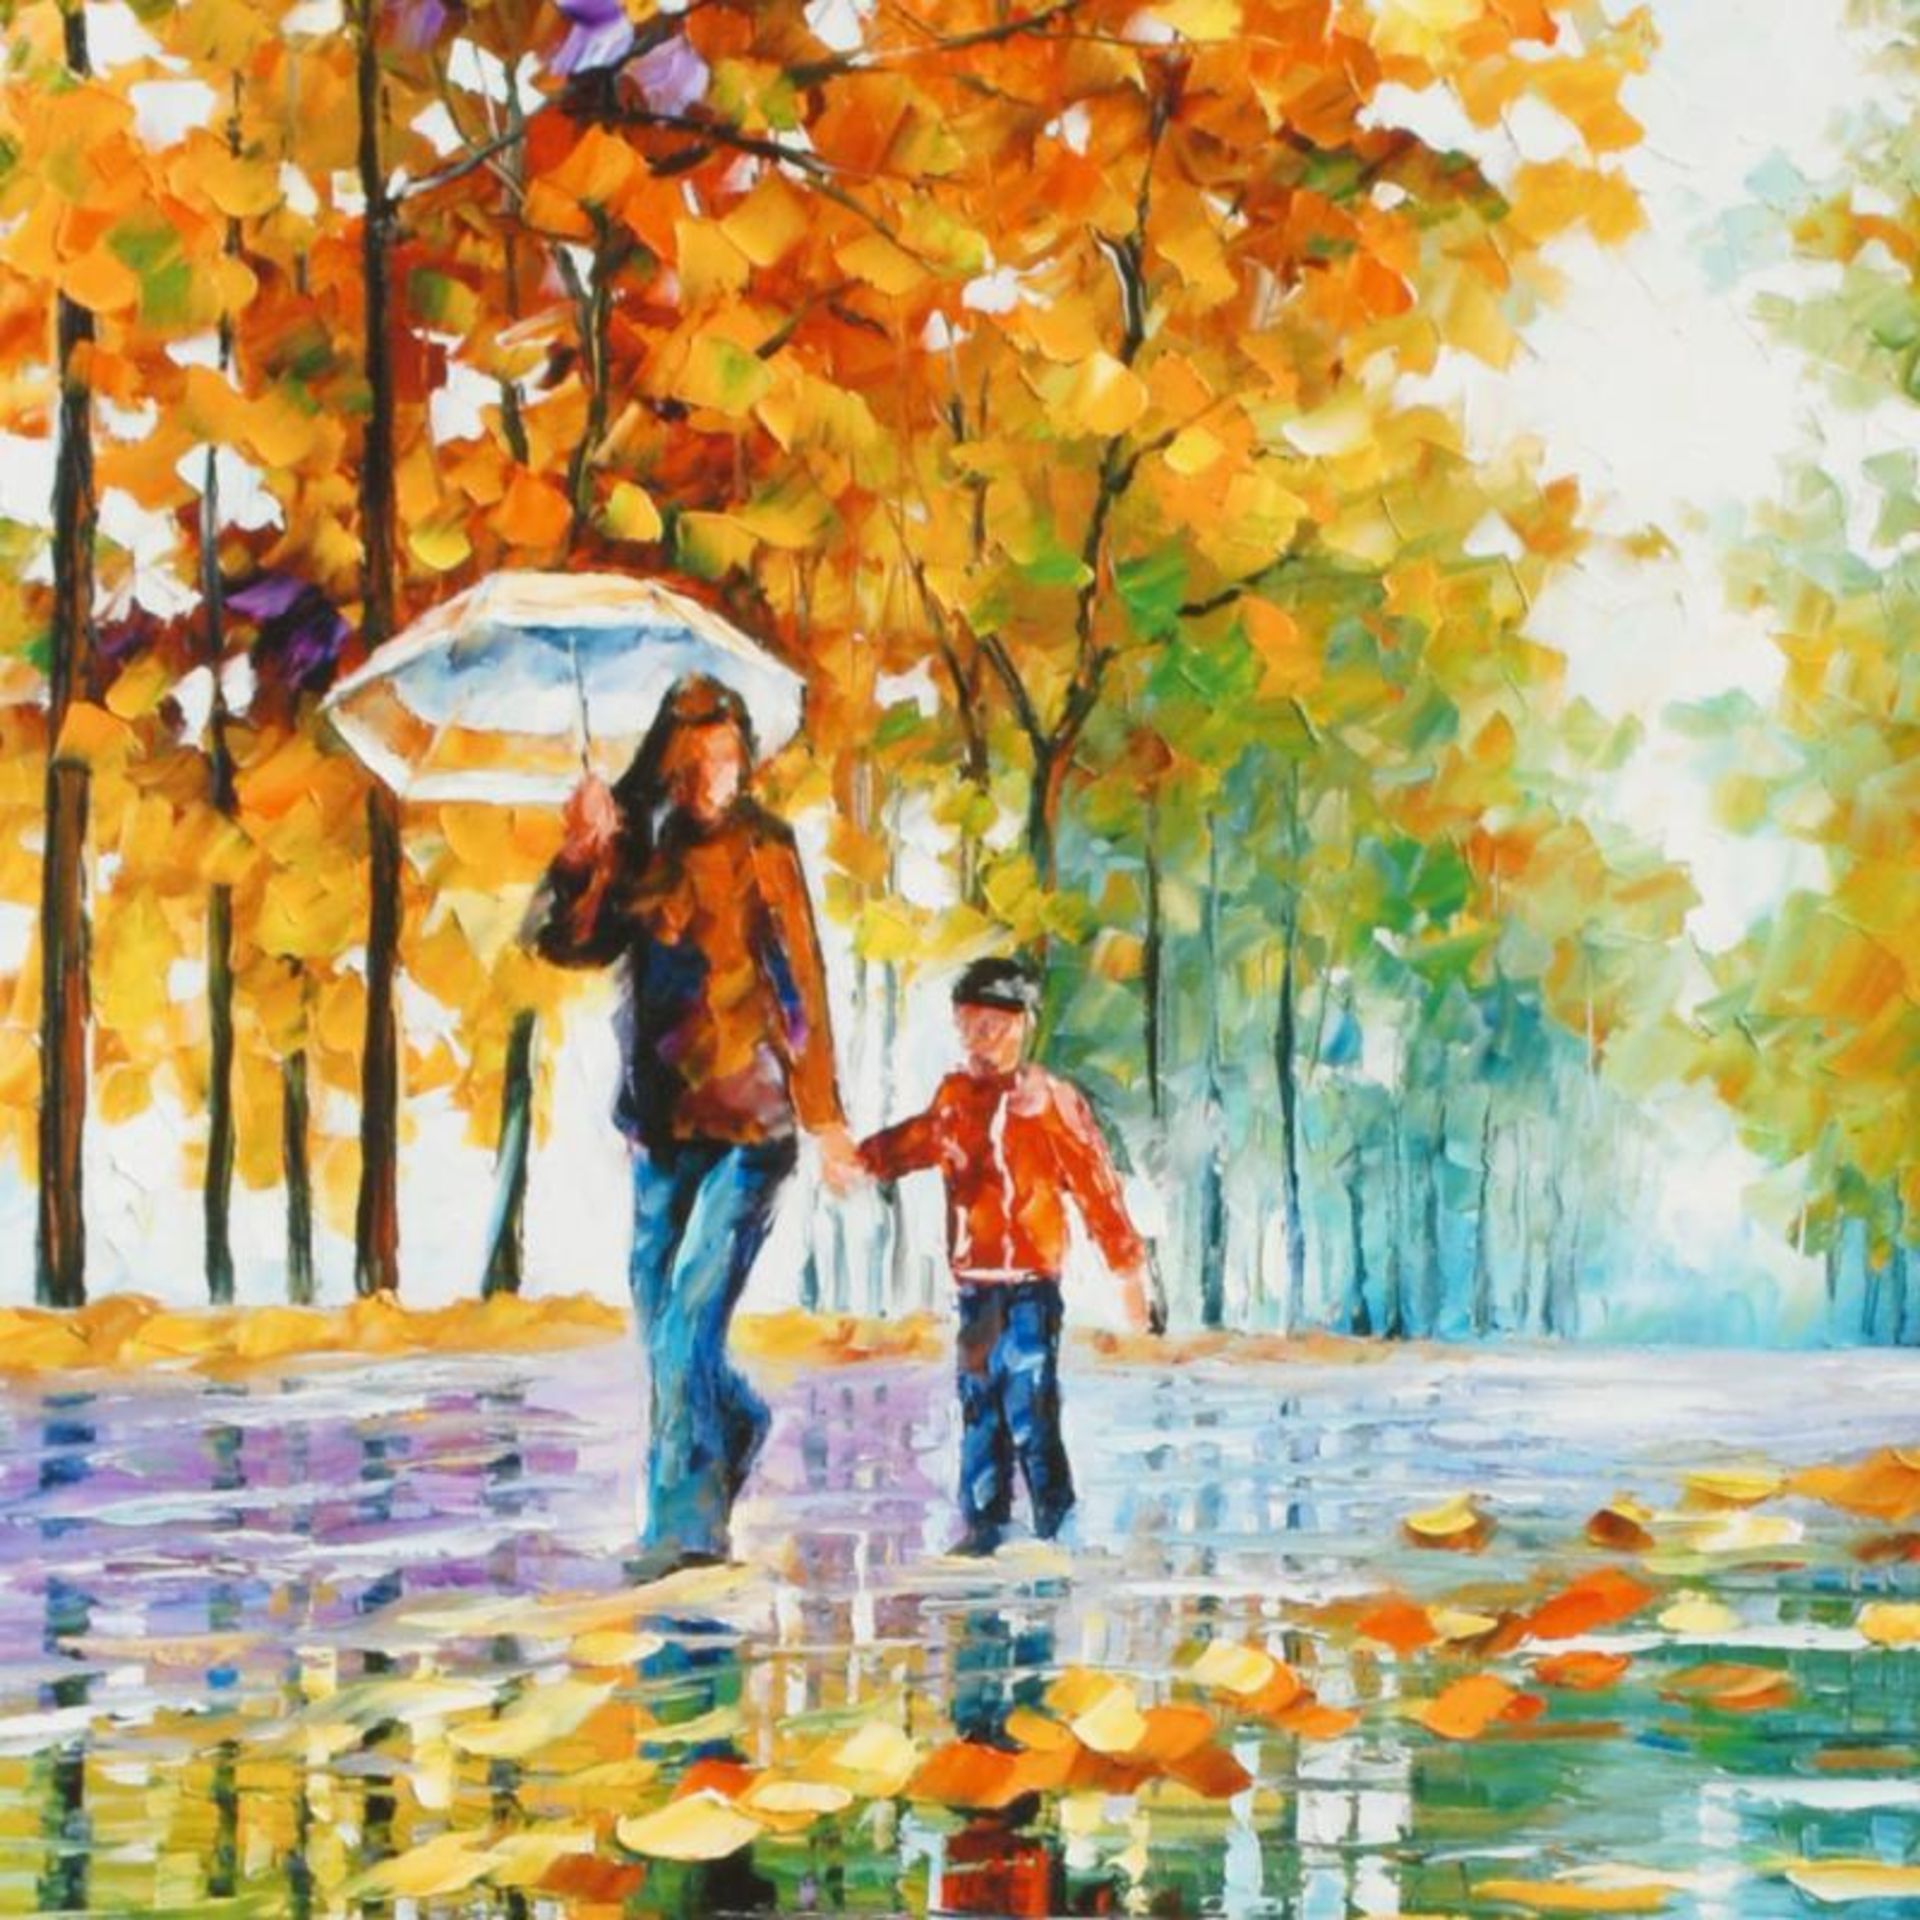 Stroll in an Autumn Park by Afremov (1955-2019) - Image 2 of 3